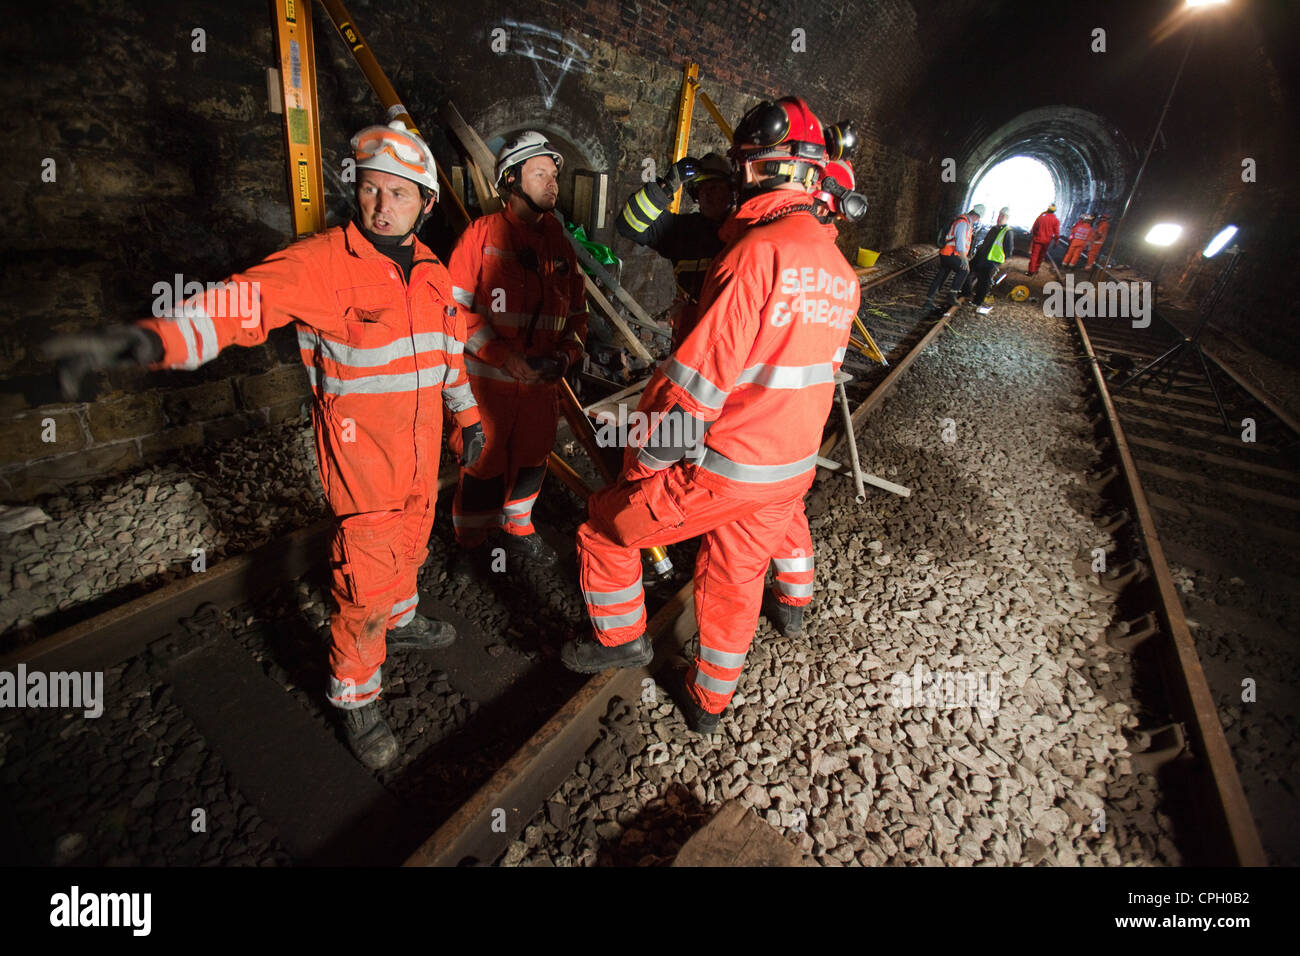 Mountain rescue, fire and railway workers practice emergency drills in a disused railway tunnel in Oldham Lancashire UK Stock Photo